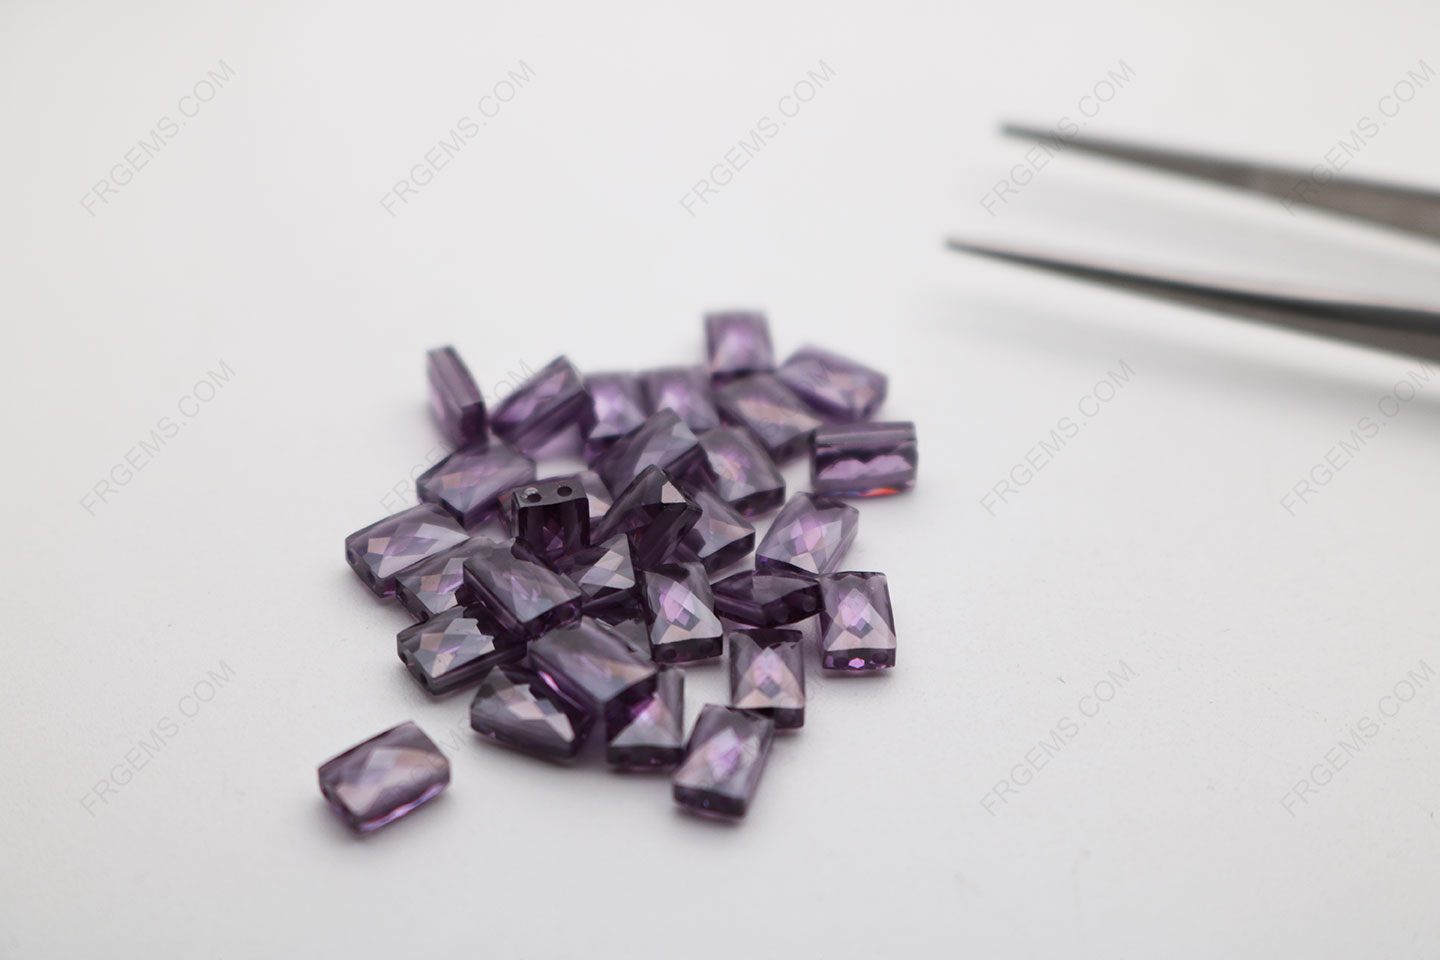 Cubic Zirconia Amethyst Color Rectangle Double checkerboard faceted cut 9x6mm stones CZ10 IMG_2779